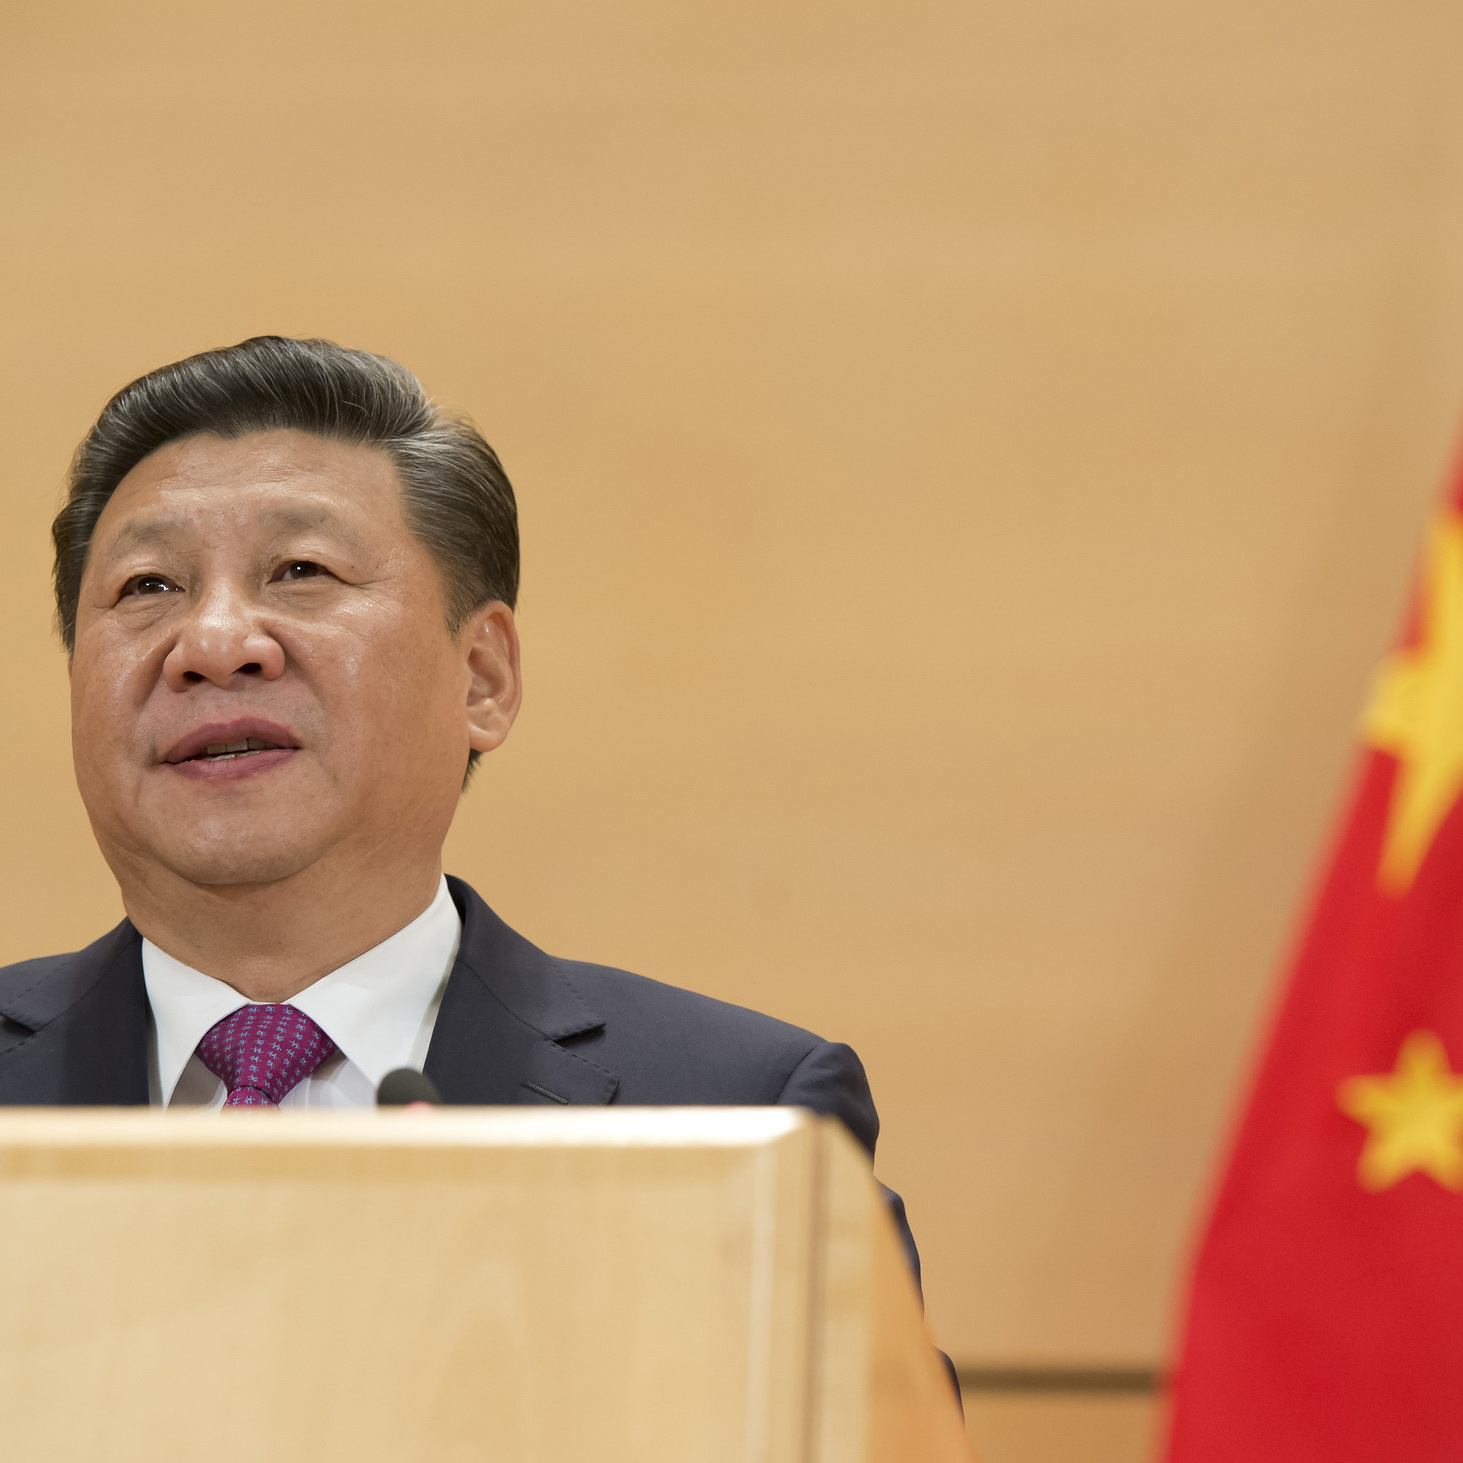 How China’s limited human rights have collapsed under Xi Jinping